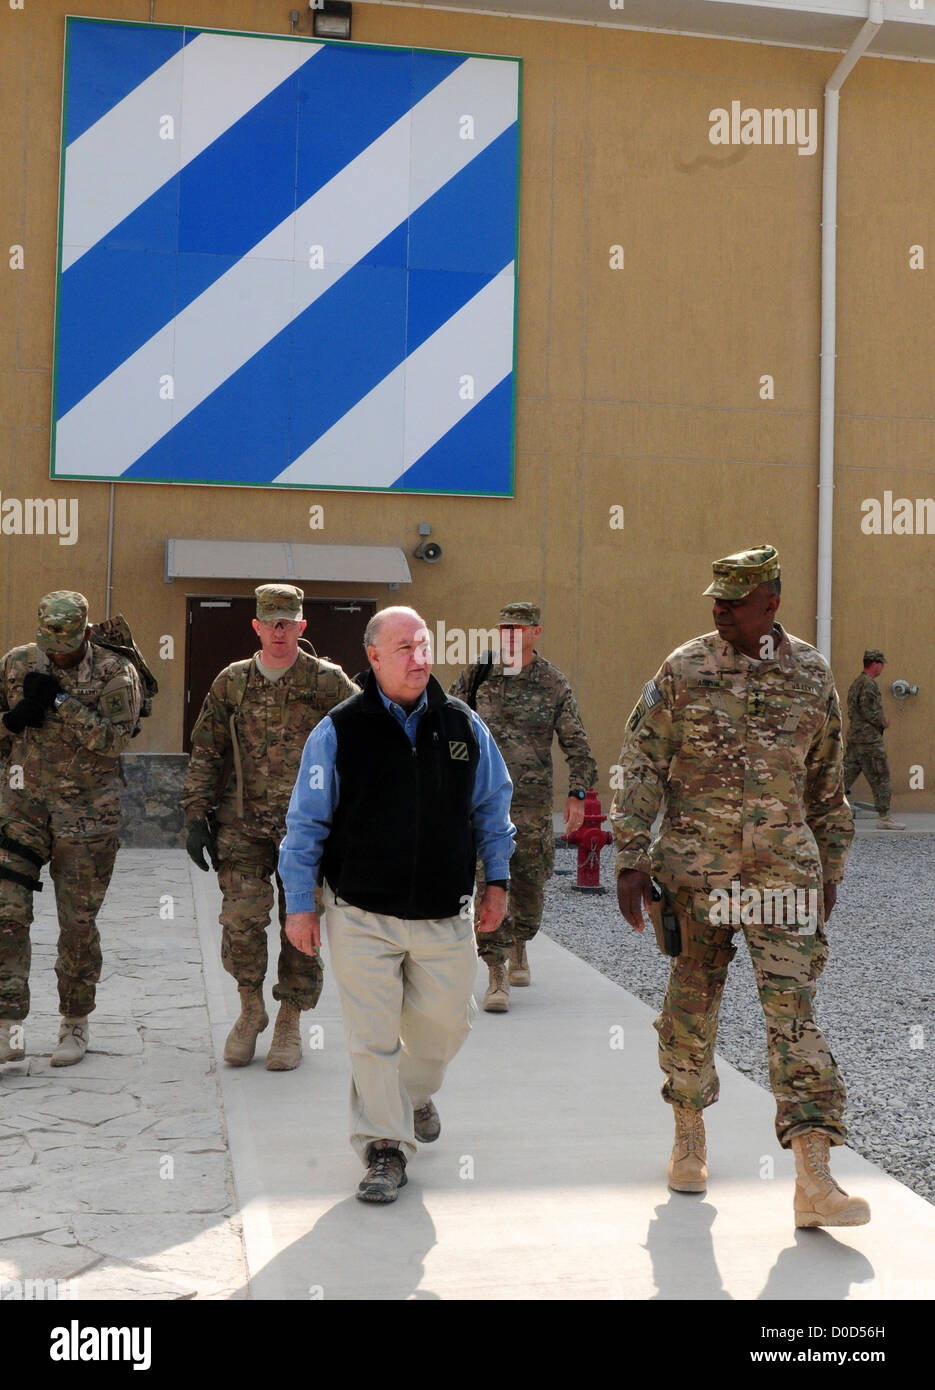 The Honorable Dr. Joseph Westphal, undersecretary of the Army, and Gen. Lloyd J. Austin III, vice chief of staff for the Army, appear during a Thanksgiving Day visit at Kandahar Airfield, Afghanistan, Nov. 22, 2012. The senior leaders were visiting servic Stock Photo